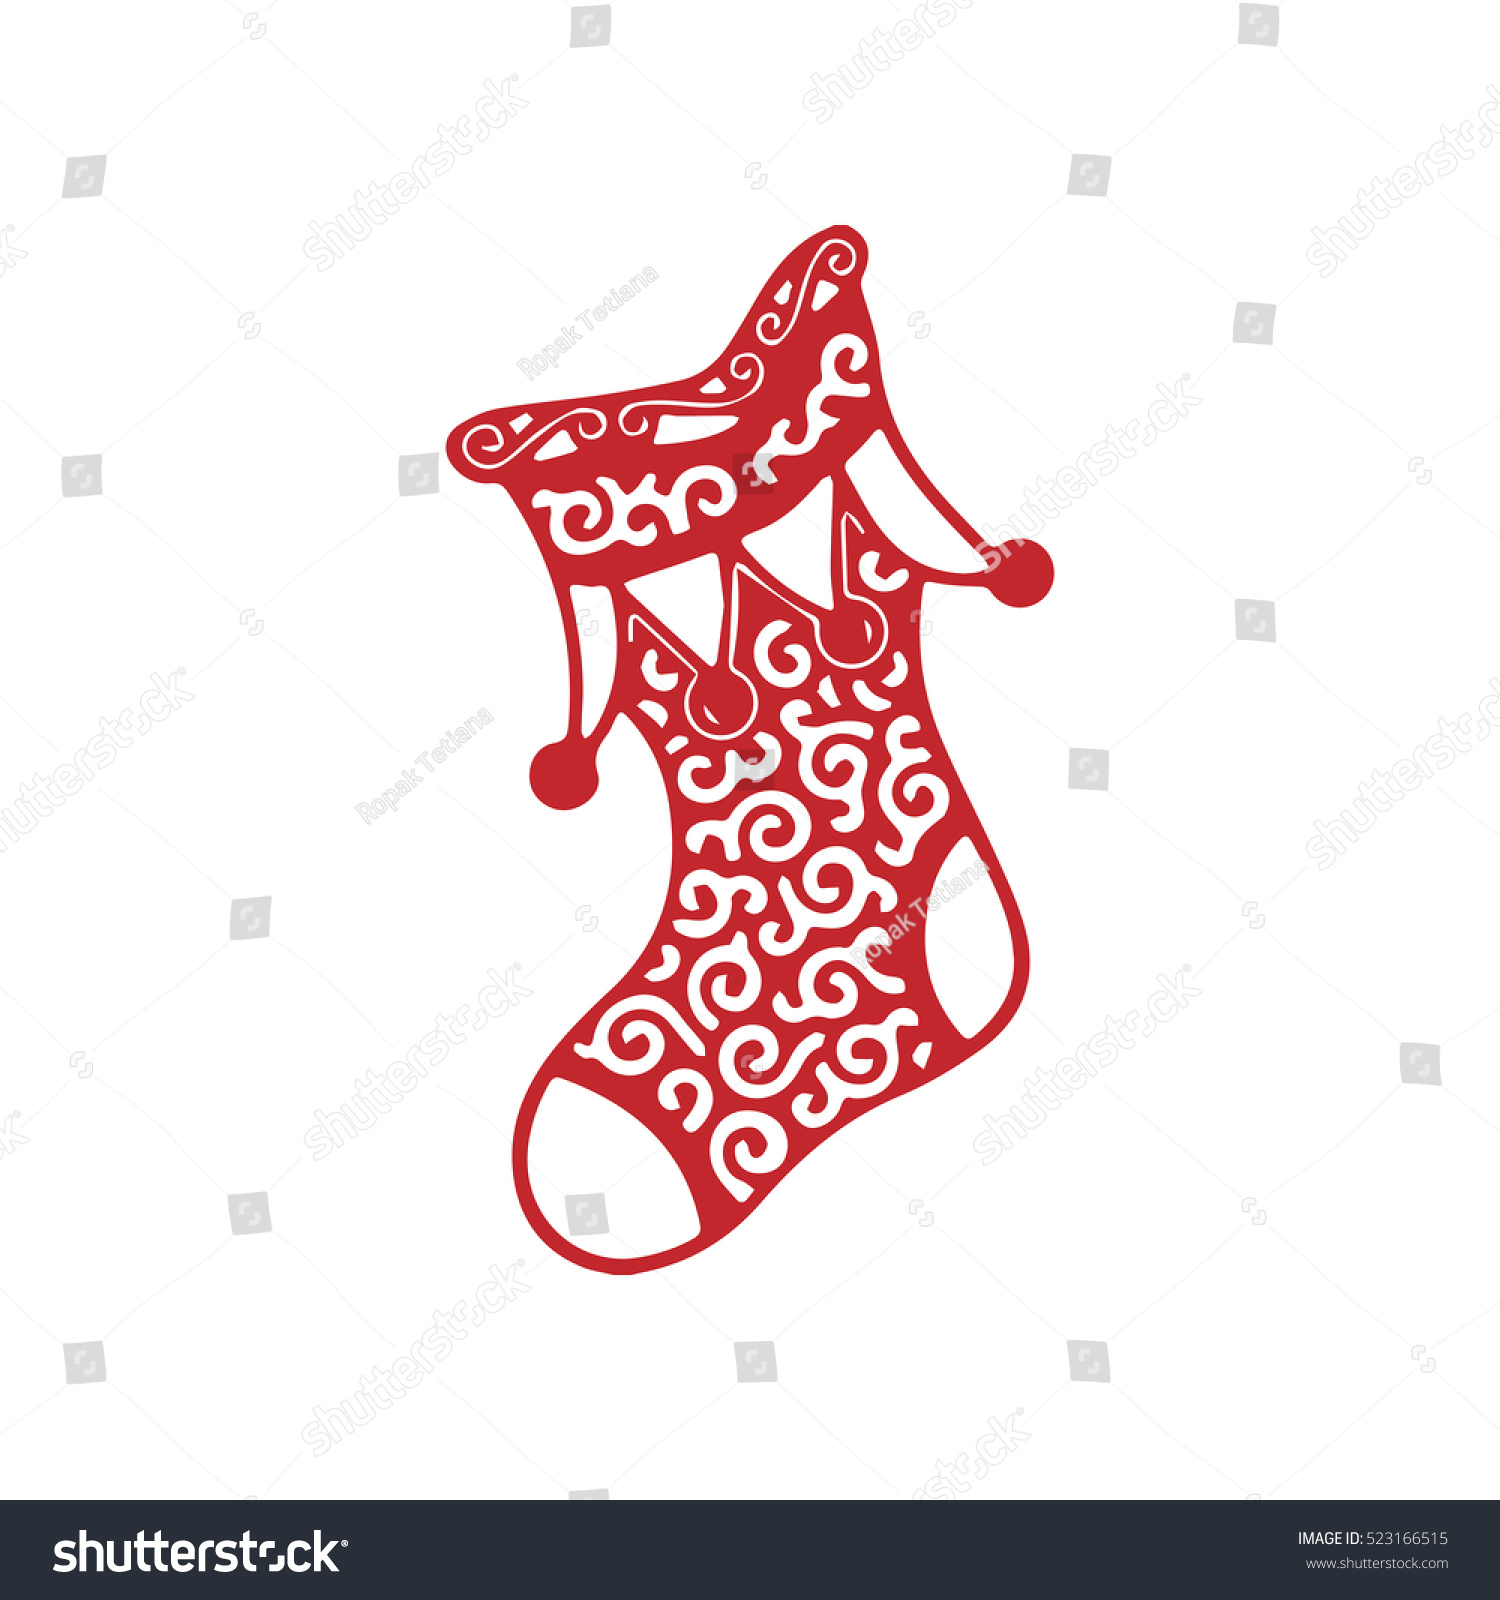 Stocking christmas present Vector illustration Christmas Sock lace pattern Christmas and New Year